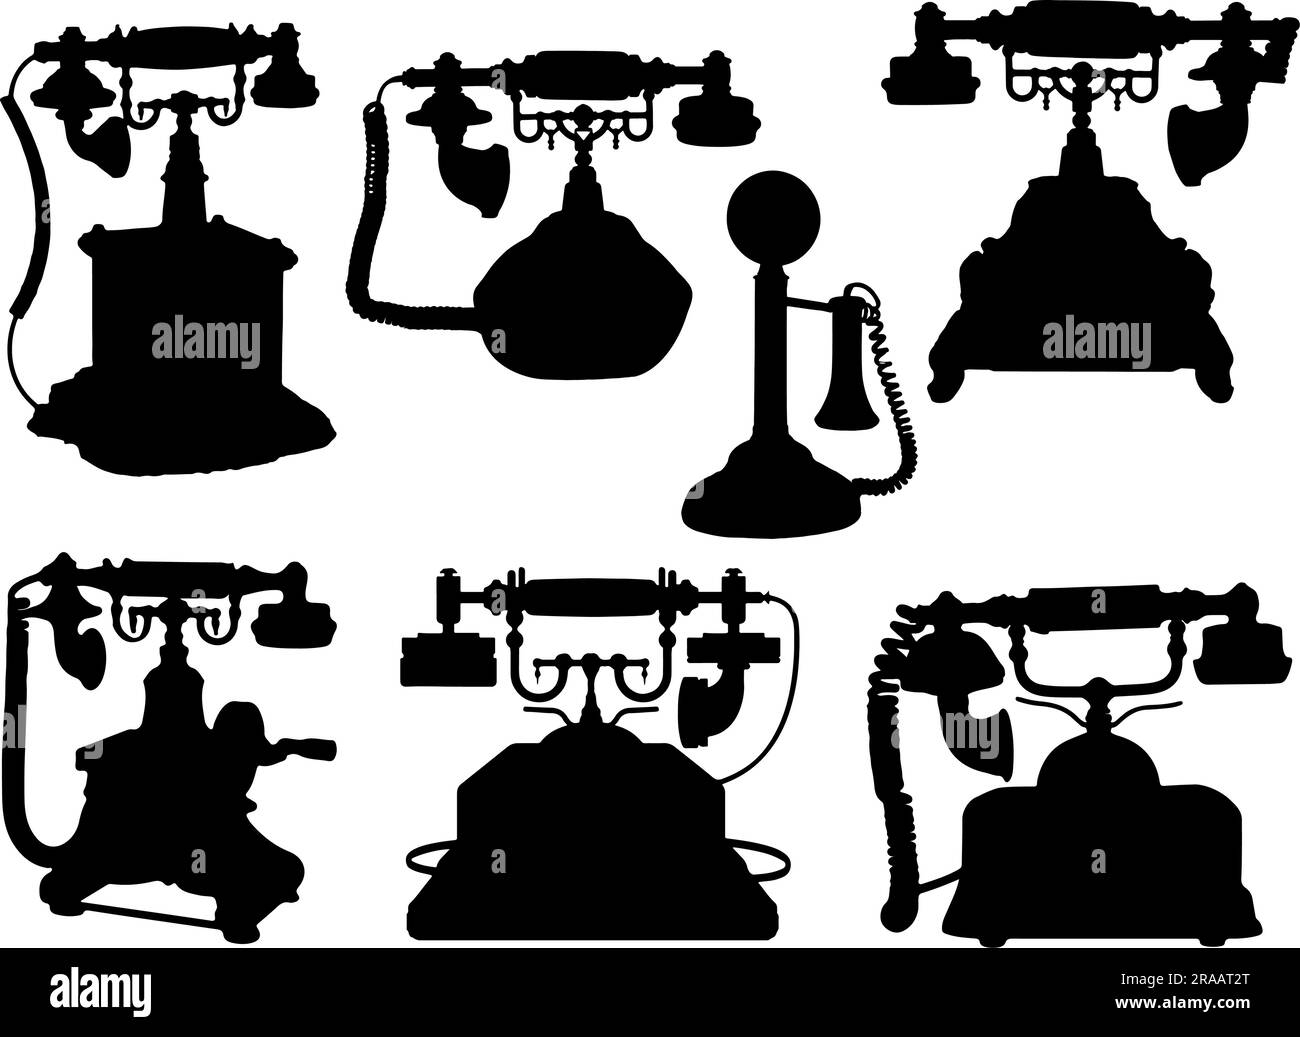 Phone Call Silhouette Stock Vector Images Alamy